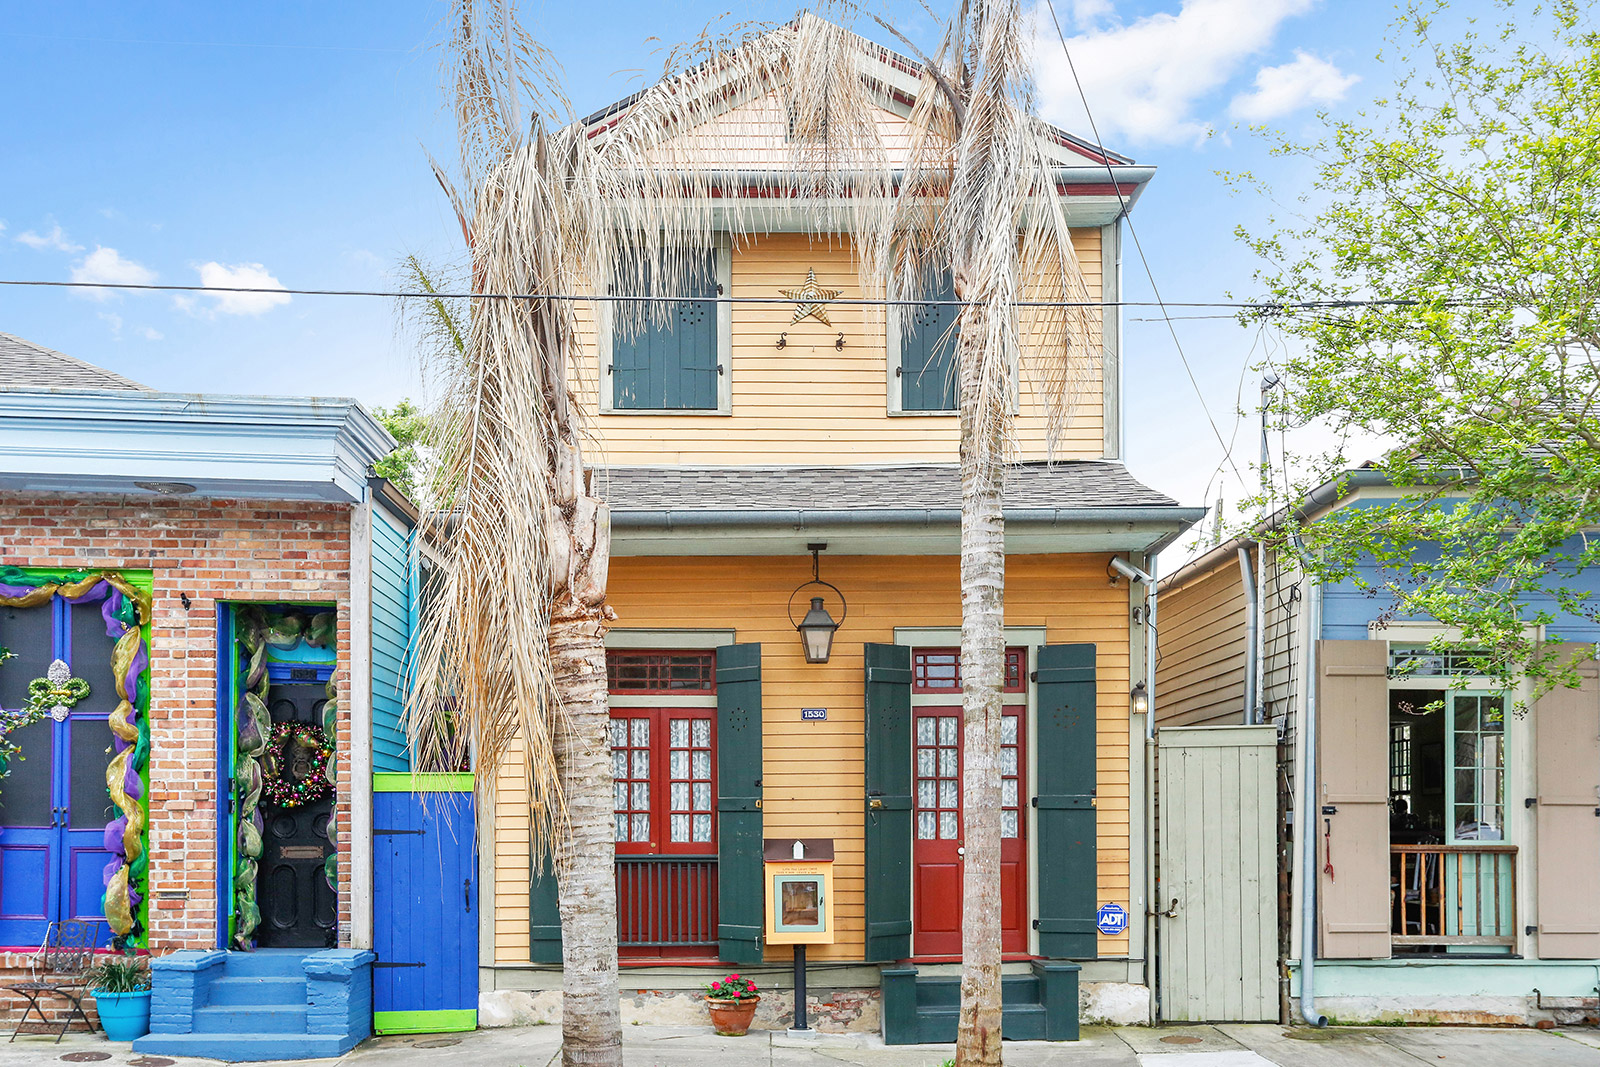 Treme retains the feel of an old Creole New Orleans neighborhood.